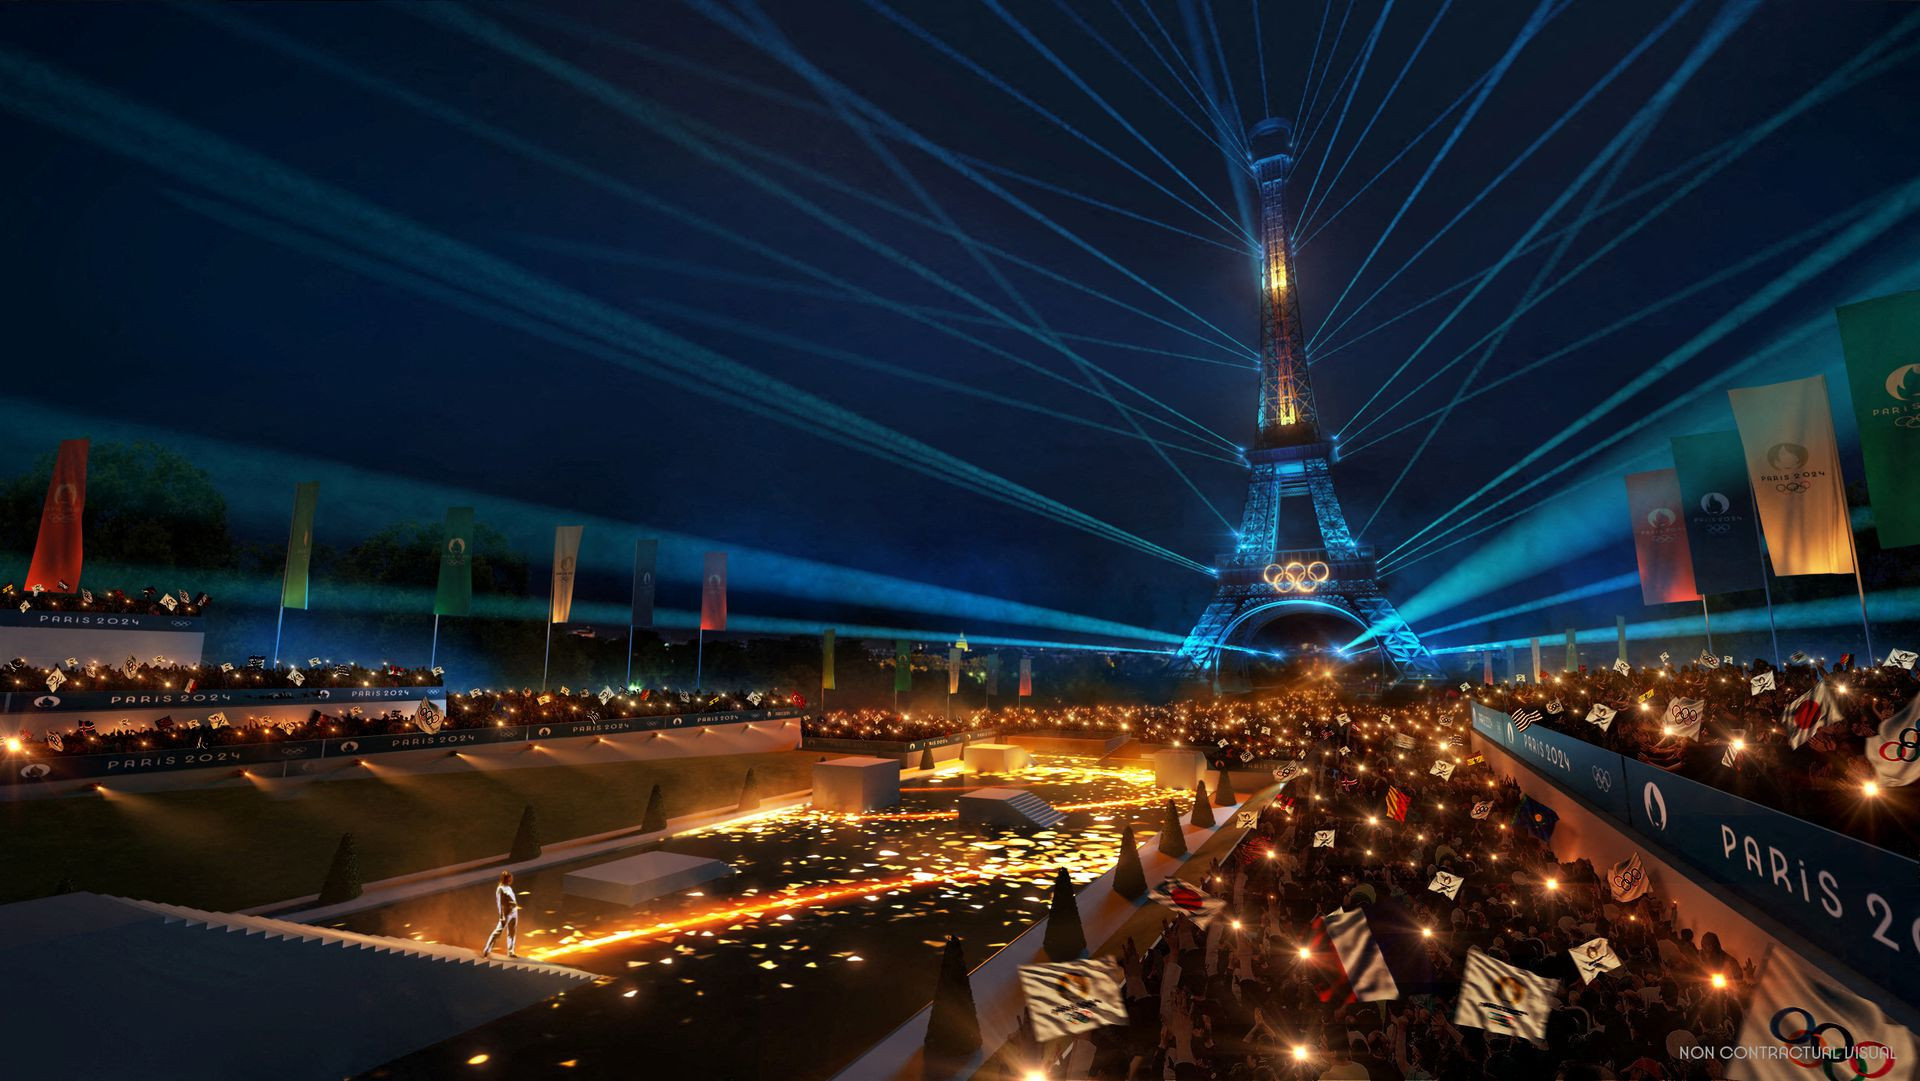 Paris 2024 to host first Paralympic Games Opening Ceremony outside